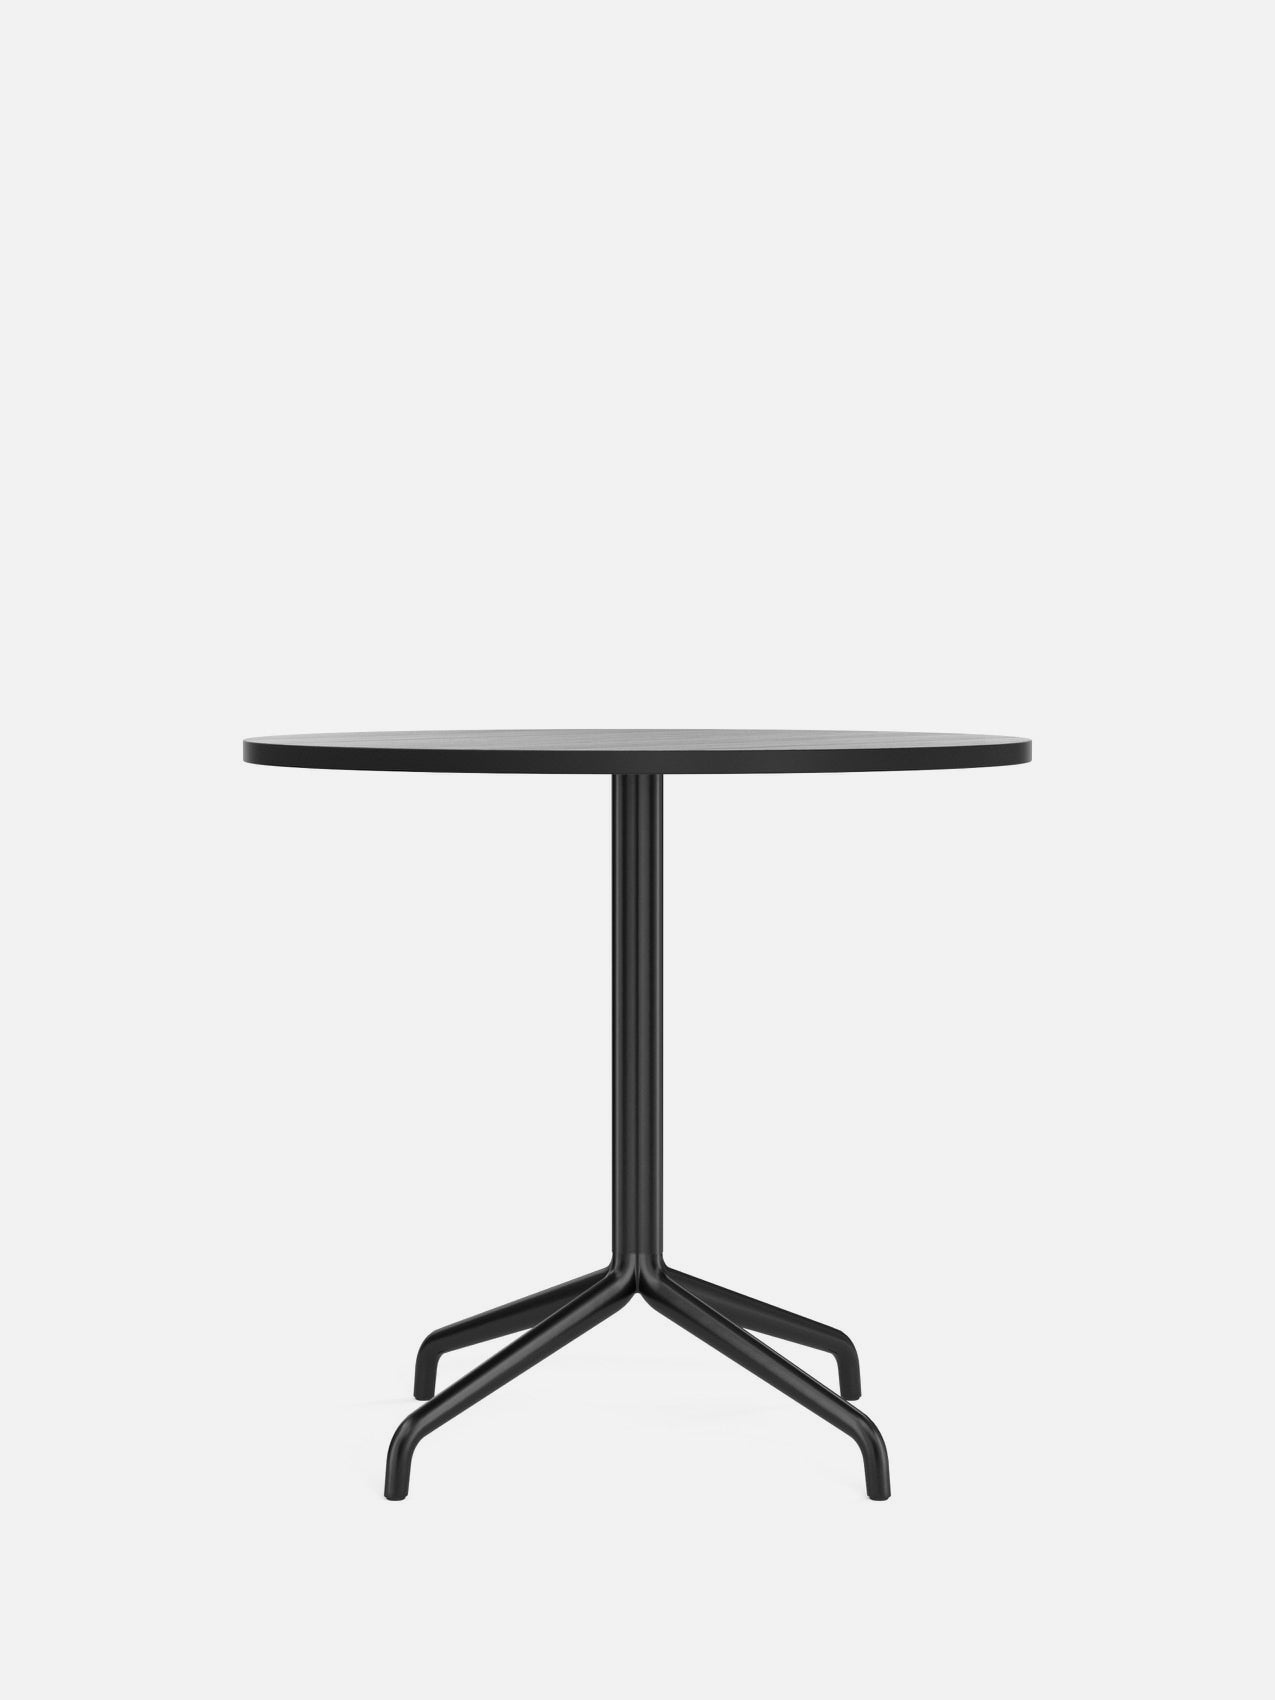 Harbour Column Table, Round Table Top-Café Table-Norm Architects-Dining Height (28.7in) - Star Base-Round 32in - Black Stained Oak Veneer-menu-minimalist-modern-danish-design-home-decor